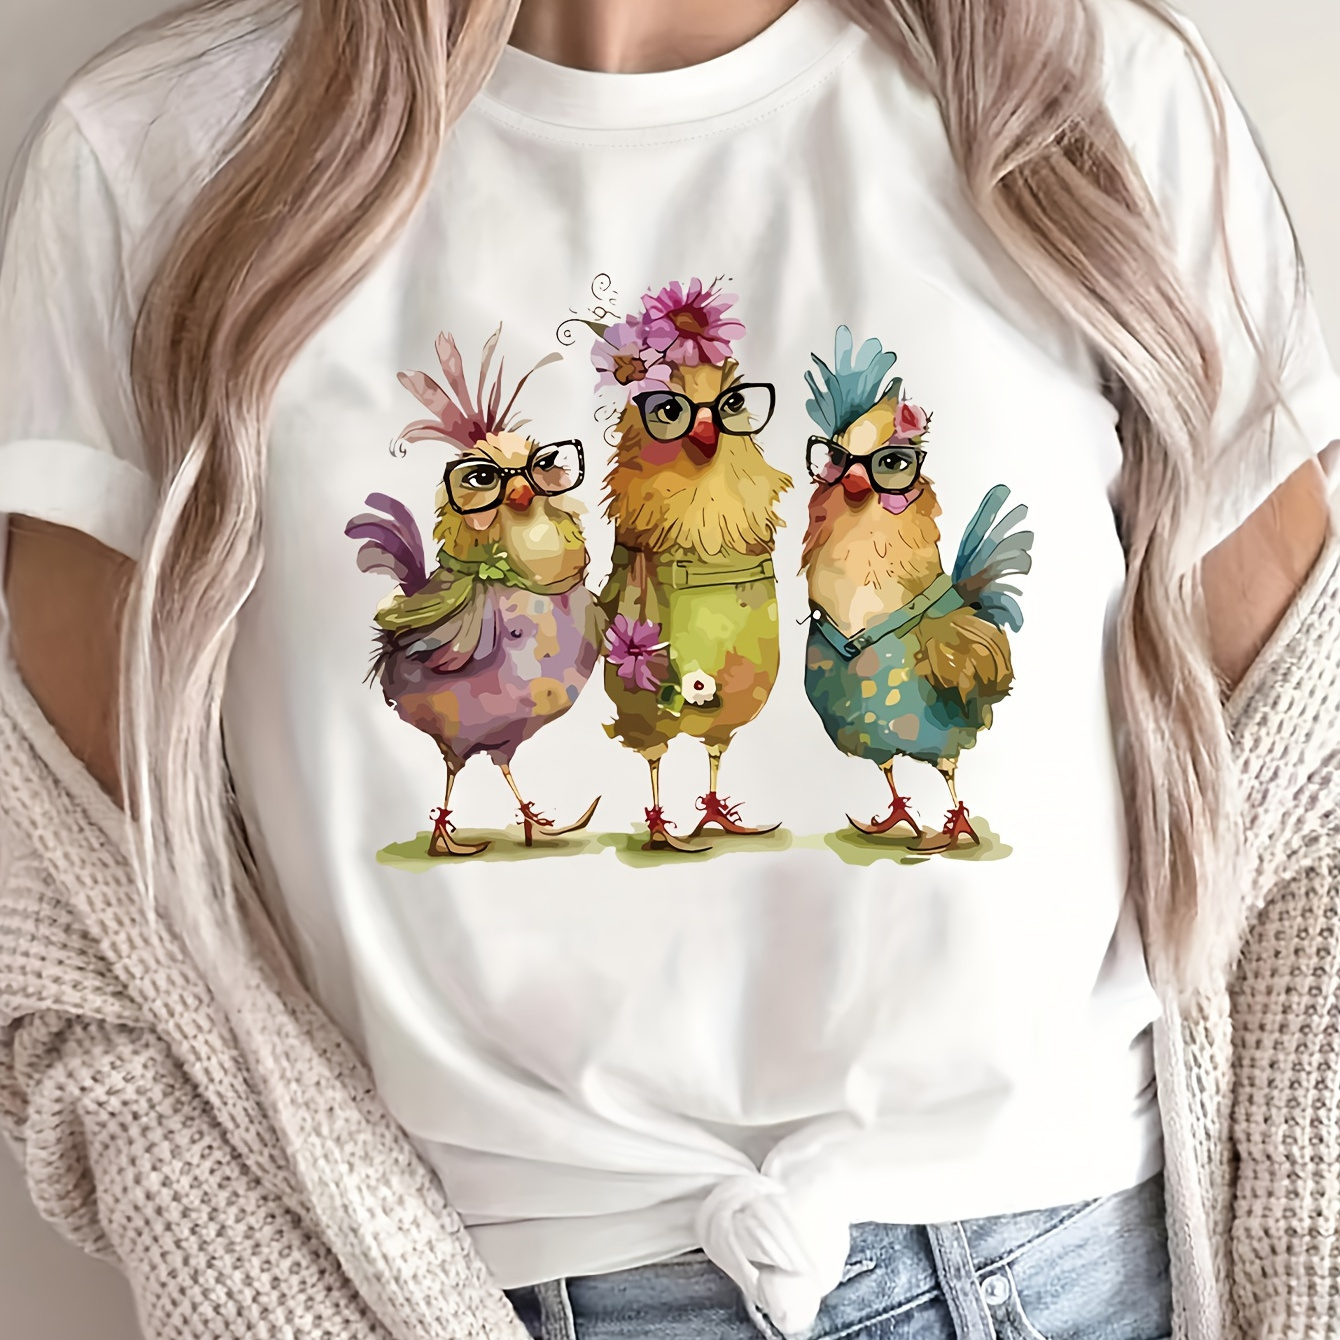 

Plus Size Chicken Print T-shirt, Casual Short Sleeve Top For Spring & Summer, Women's Plus Size Clothing